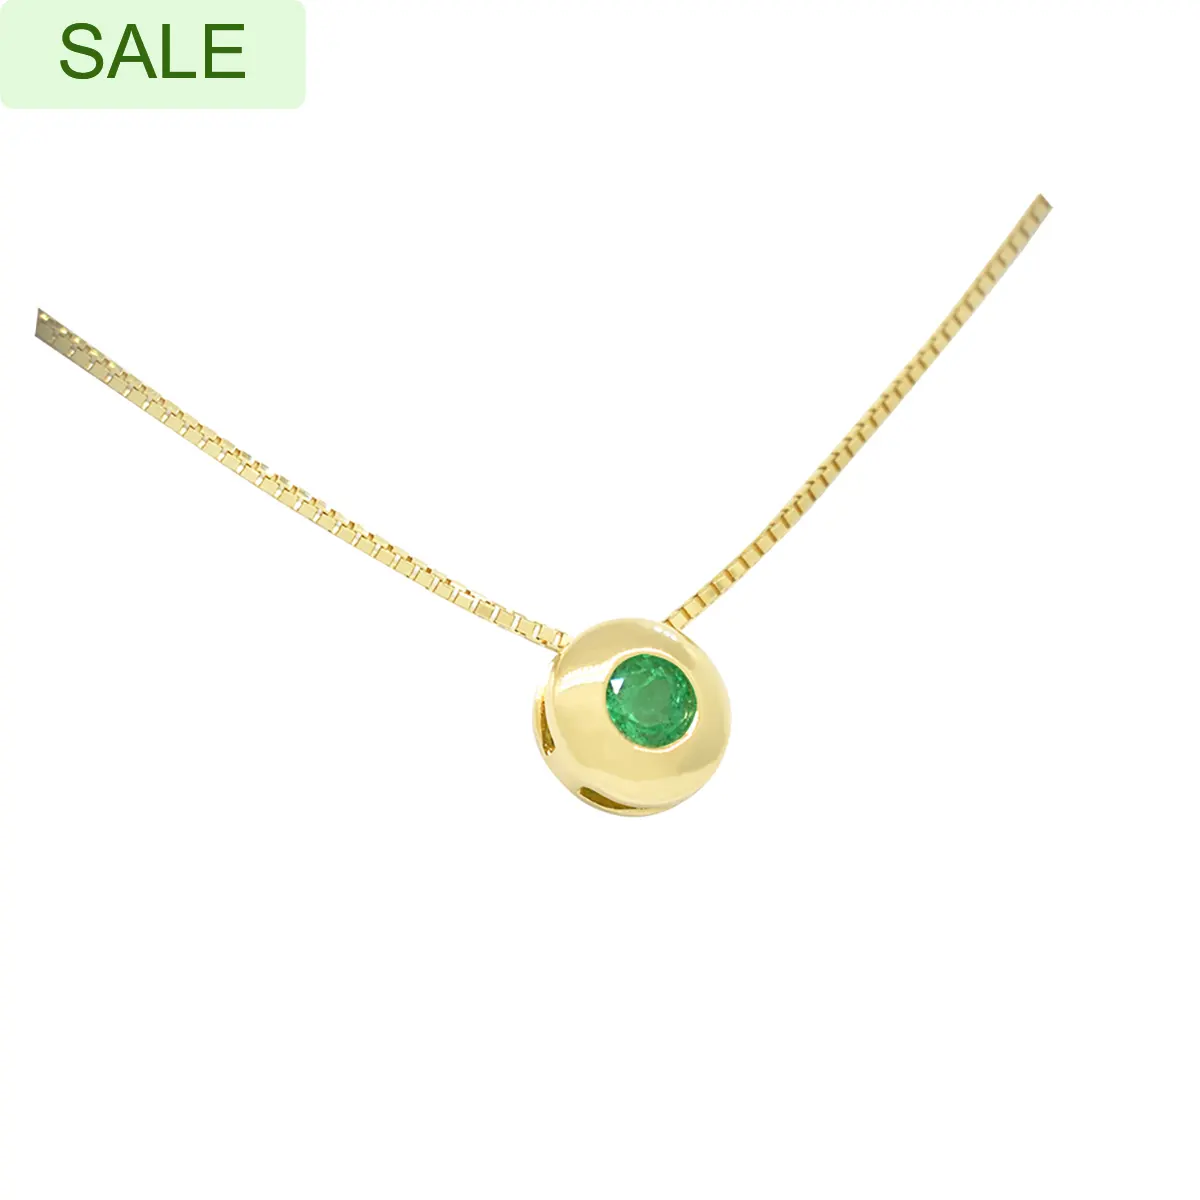 Solitaire Emerald Necklace in 18K Gold Bezel Set with Round Emerald